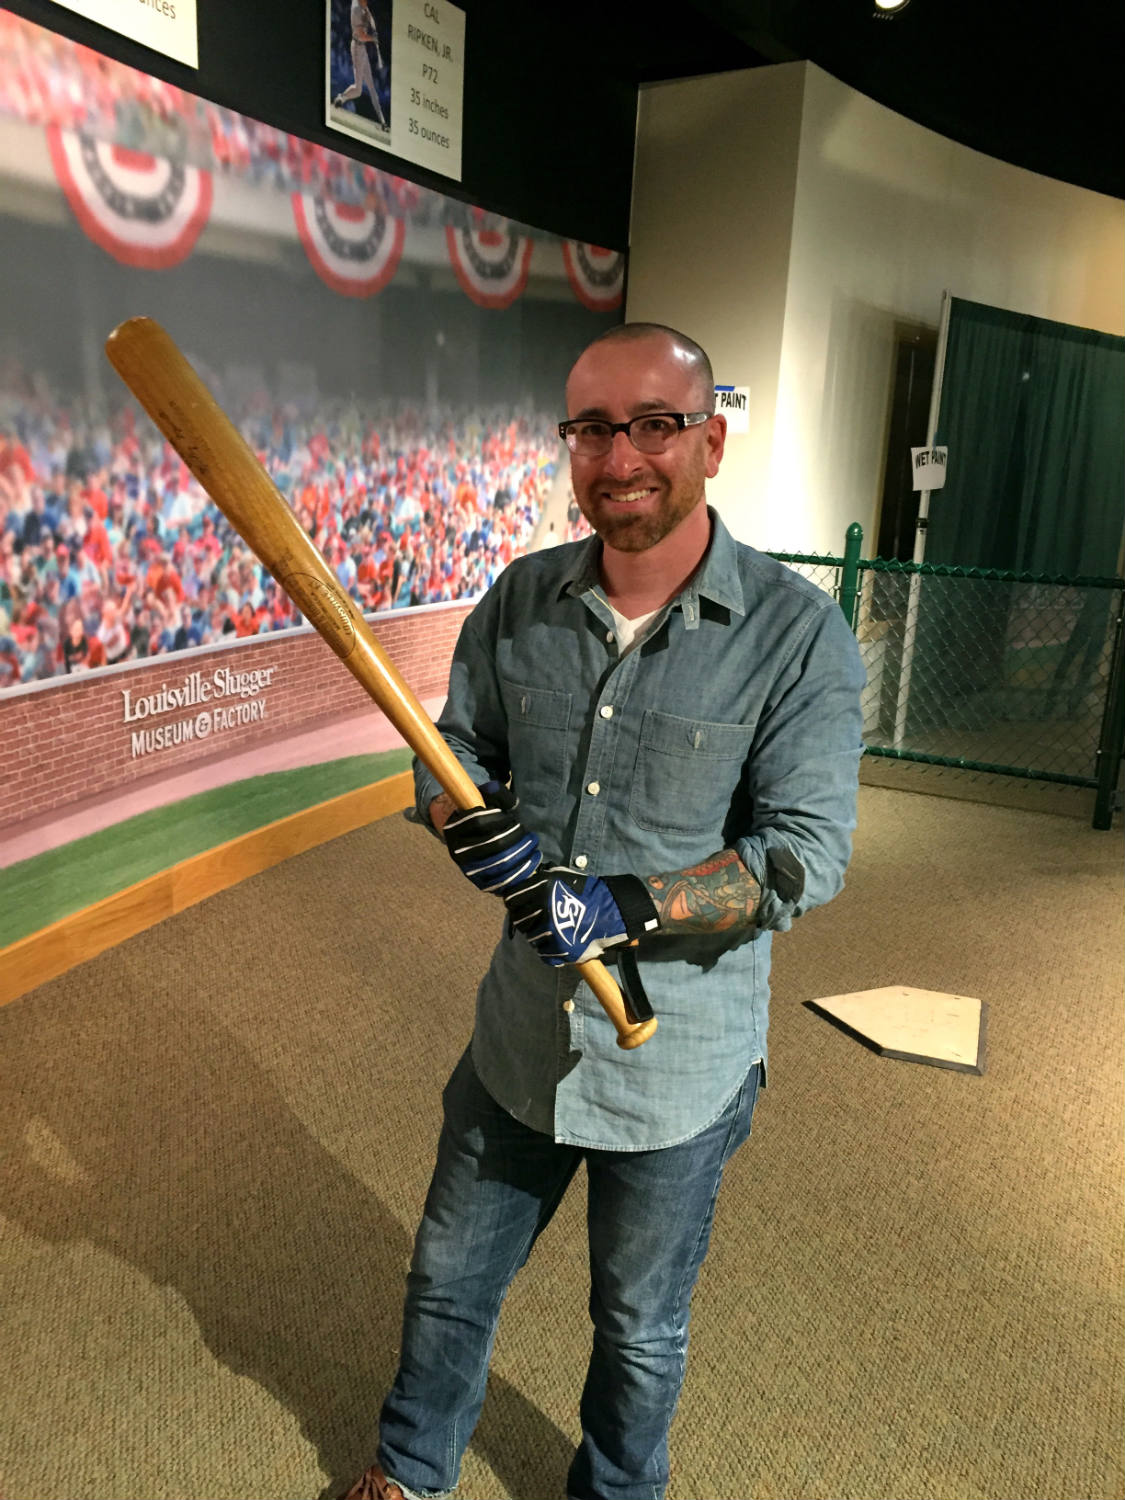 Me and Mickey Mantle's 1961 bat the Louisville Slugger Museum in Kentucky